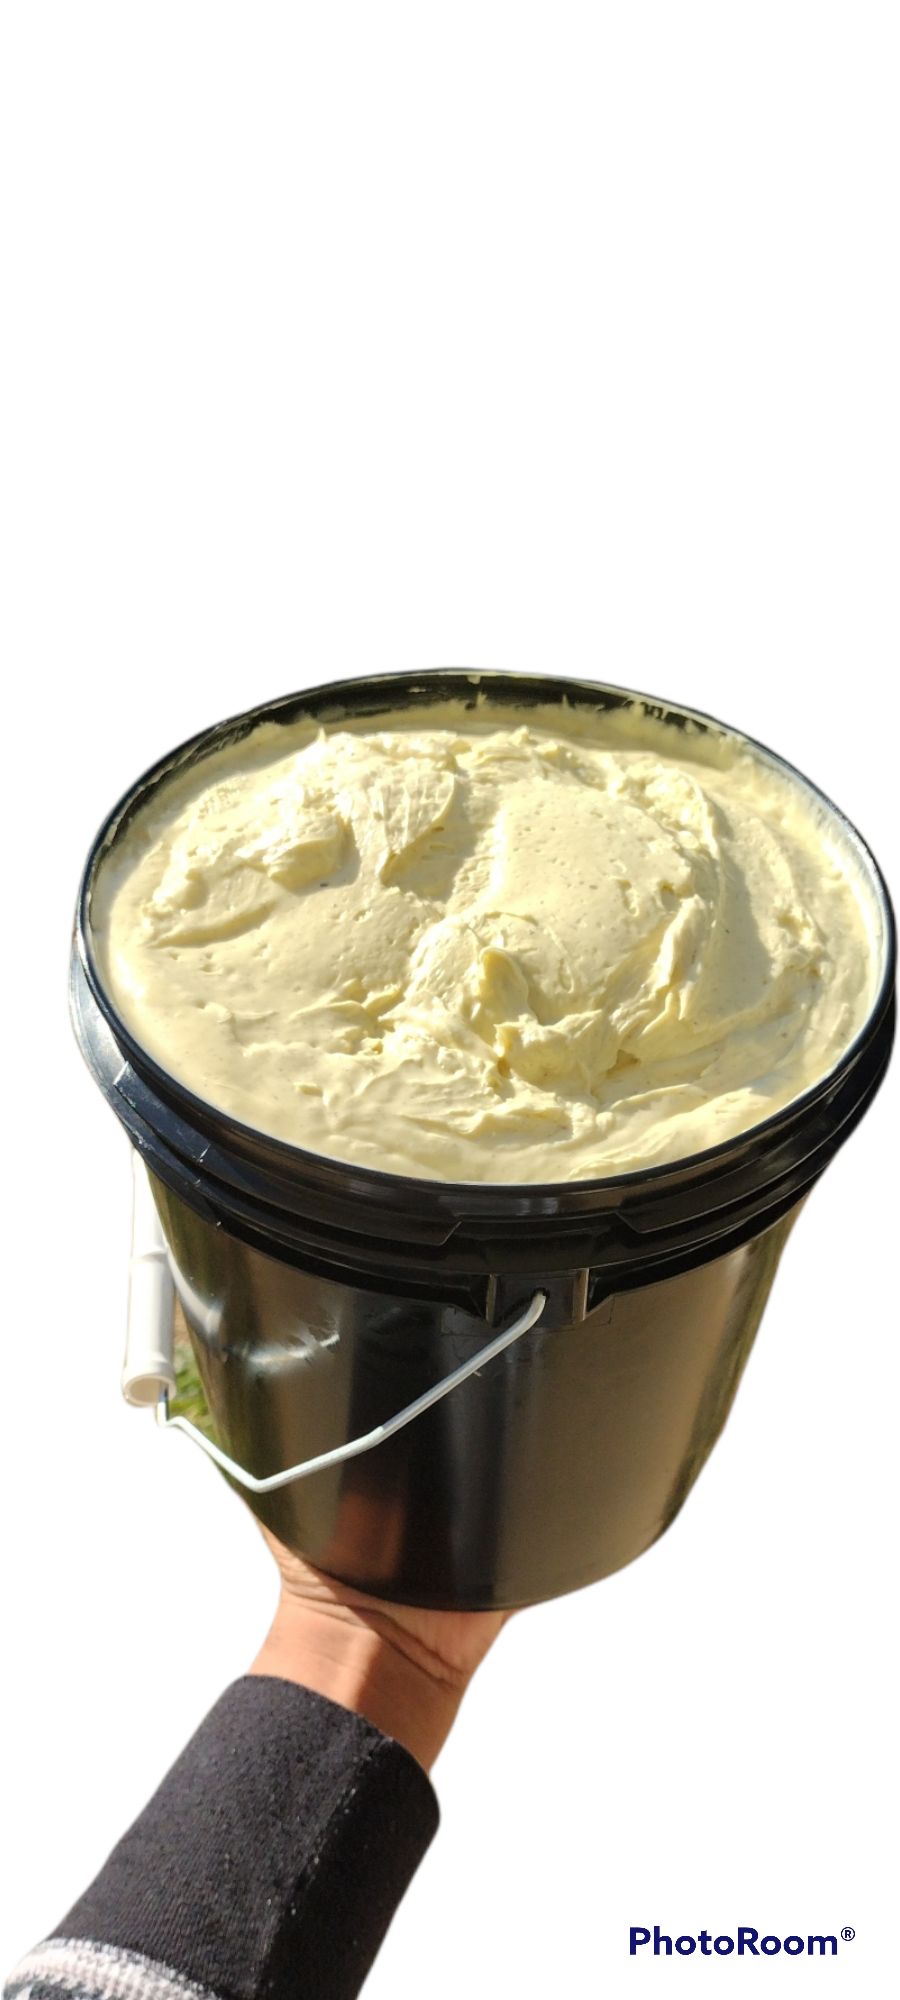 Wholesale Chebe Butter in Gallon